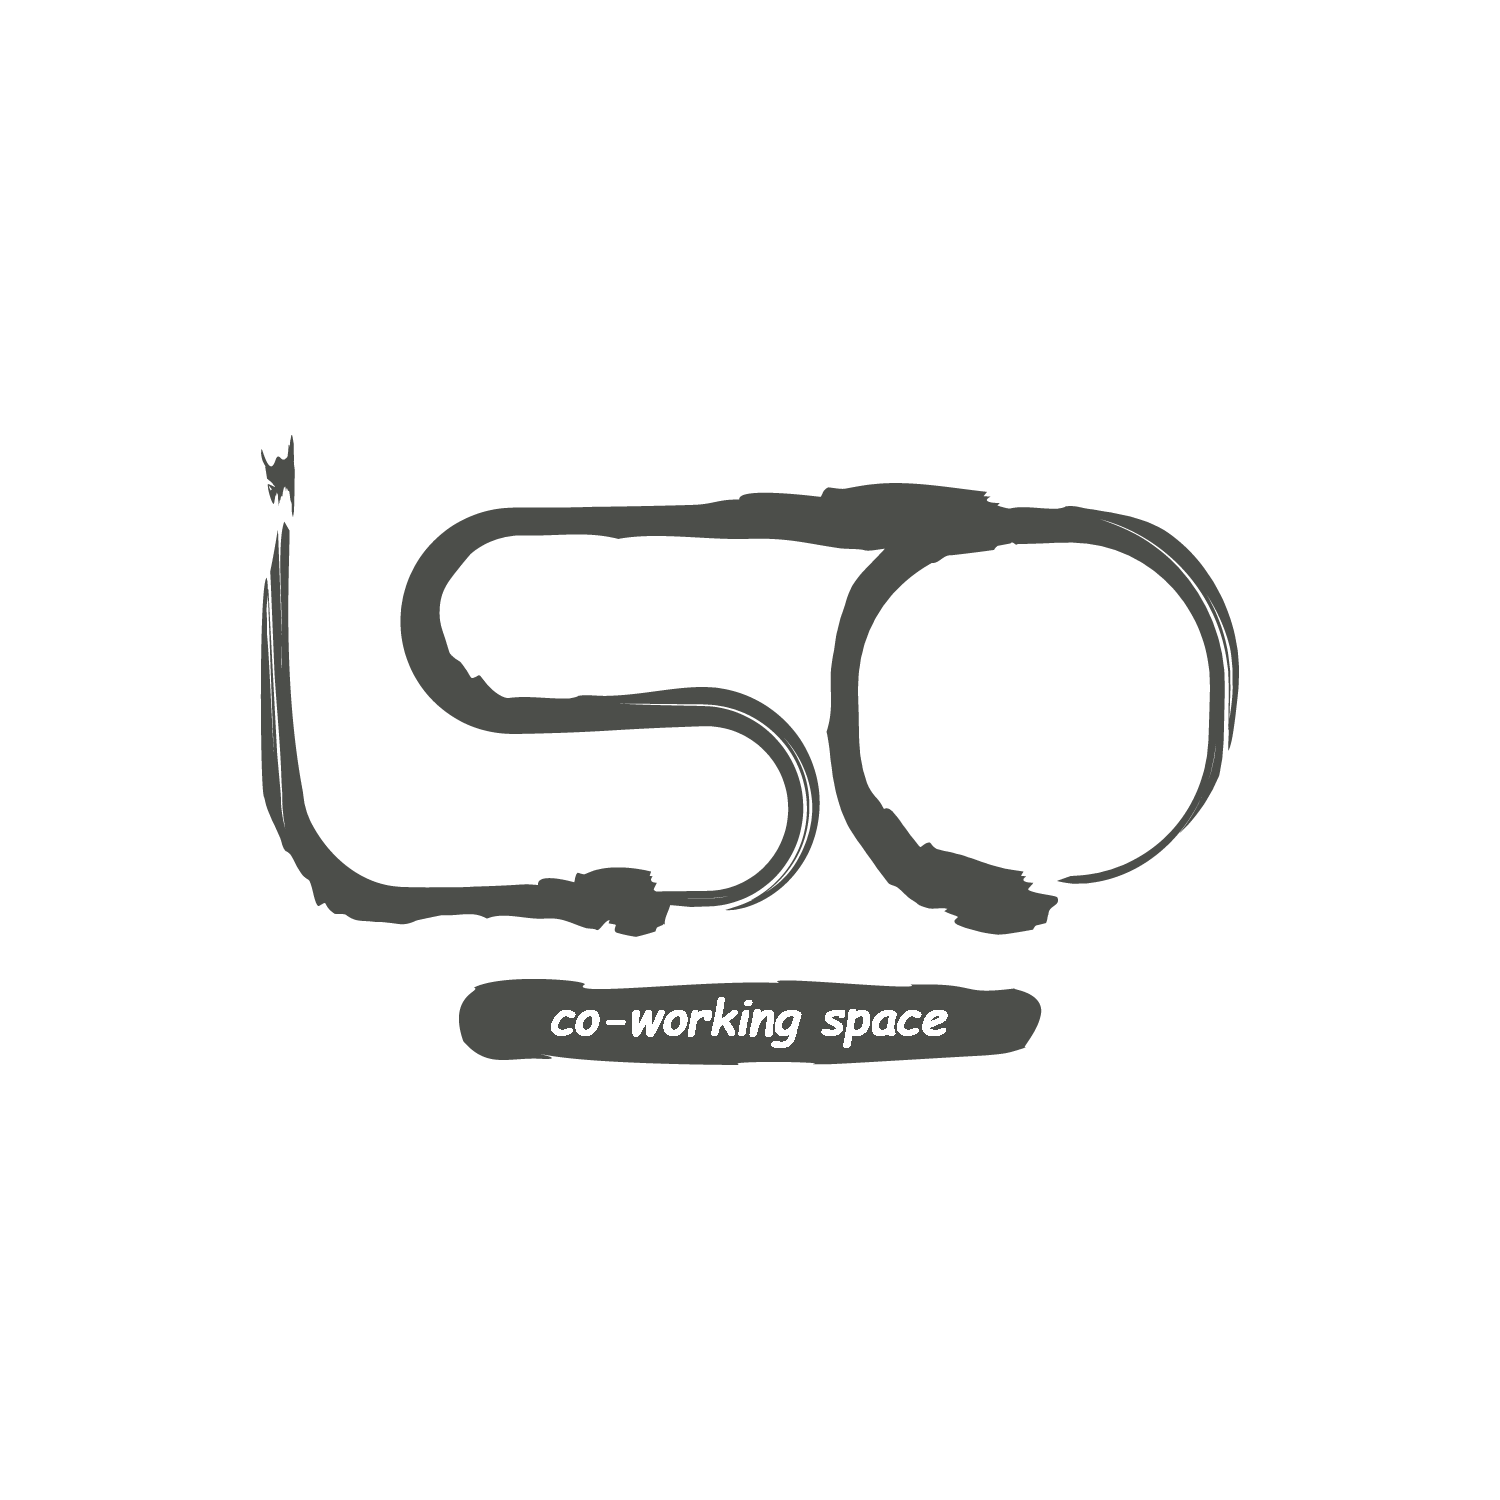 iso co-working space logo